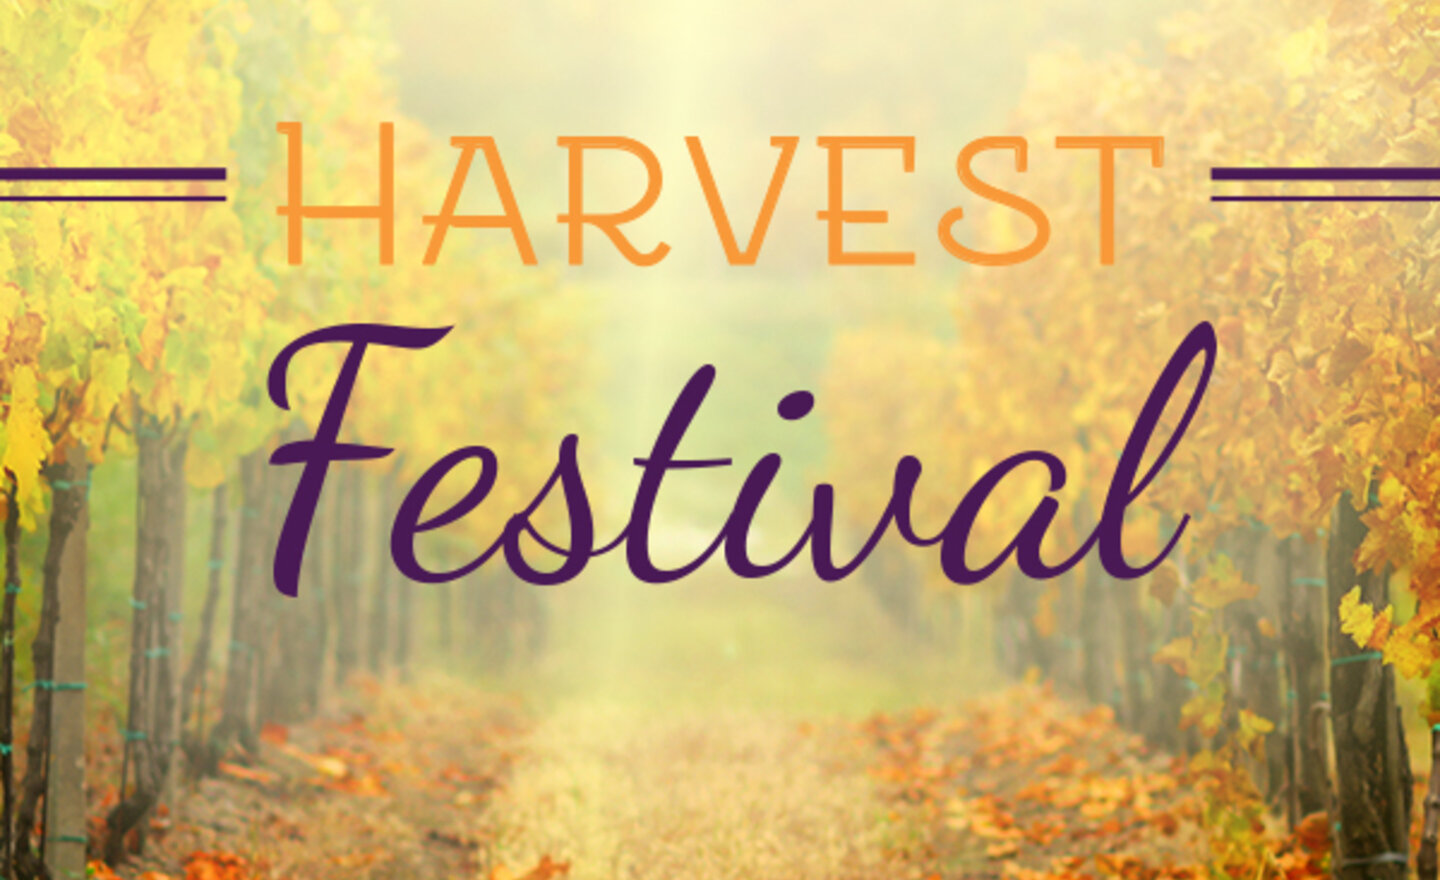 Image of Harvest festival contributions